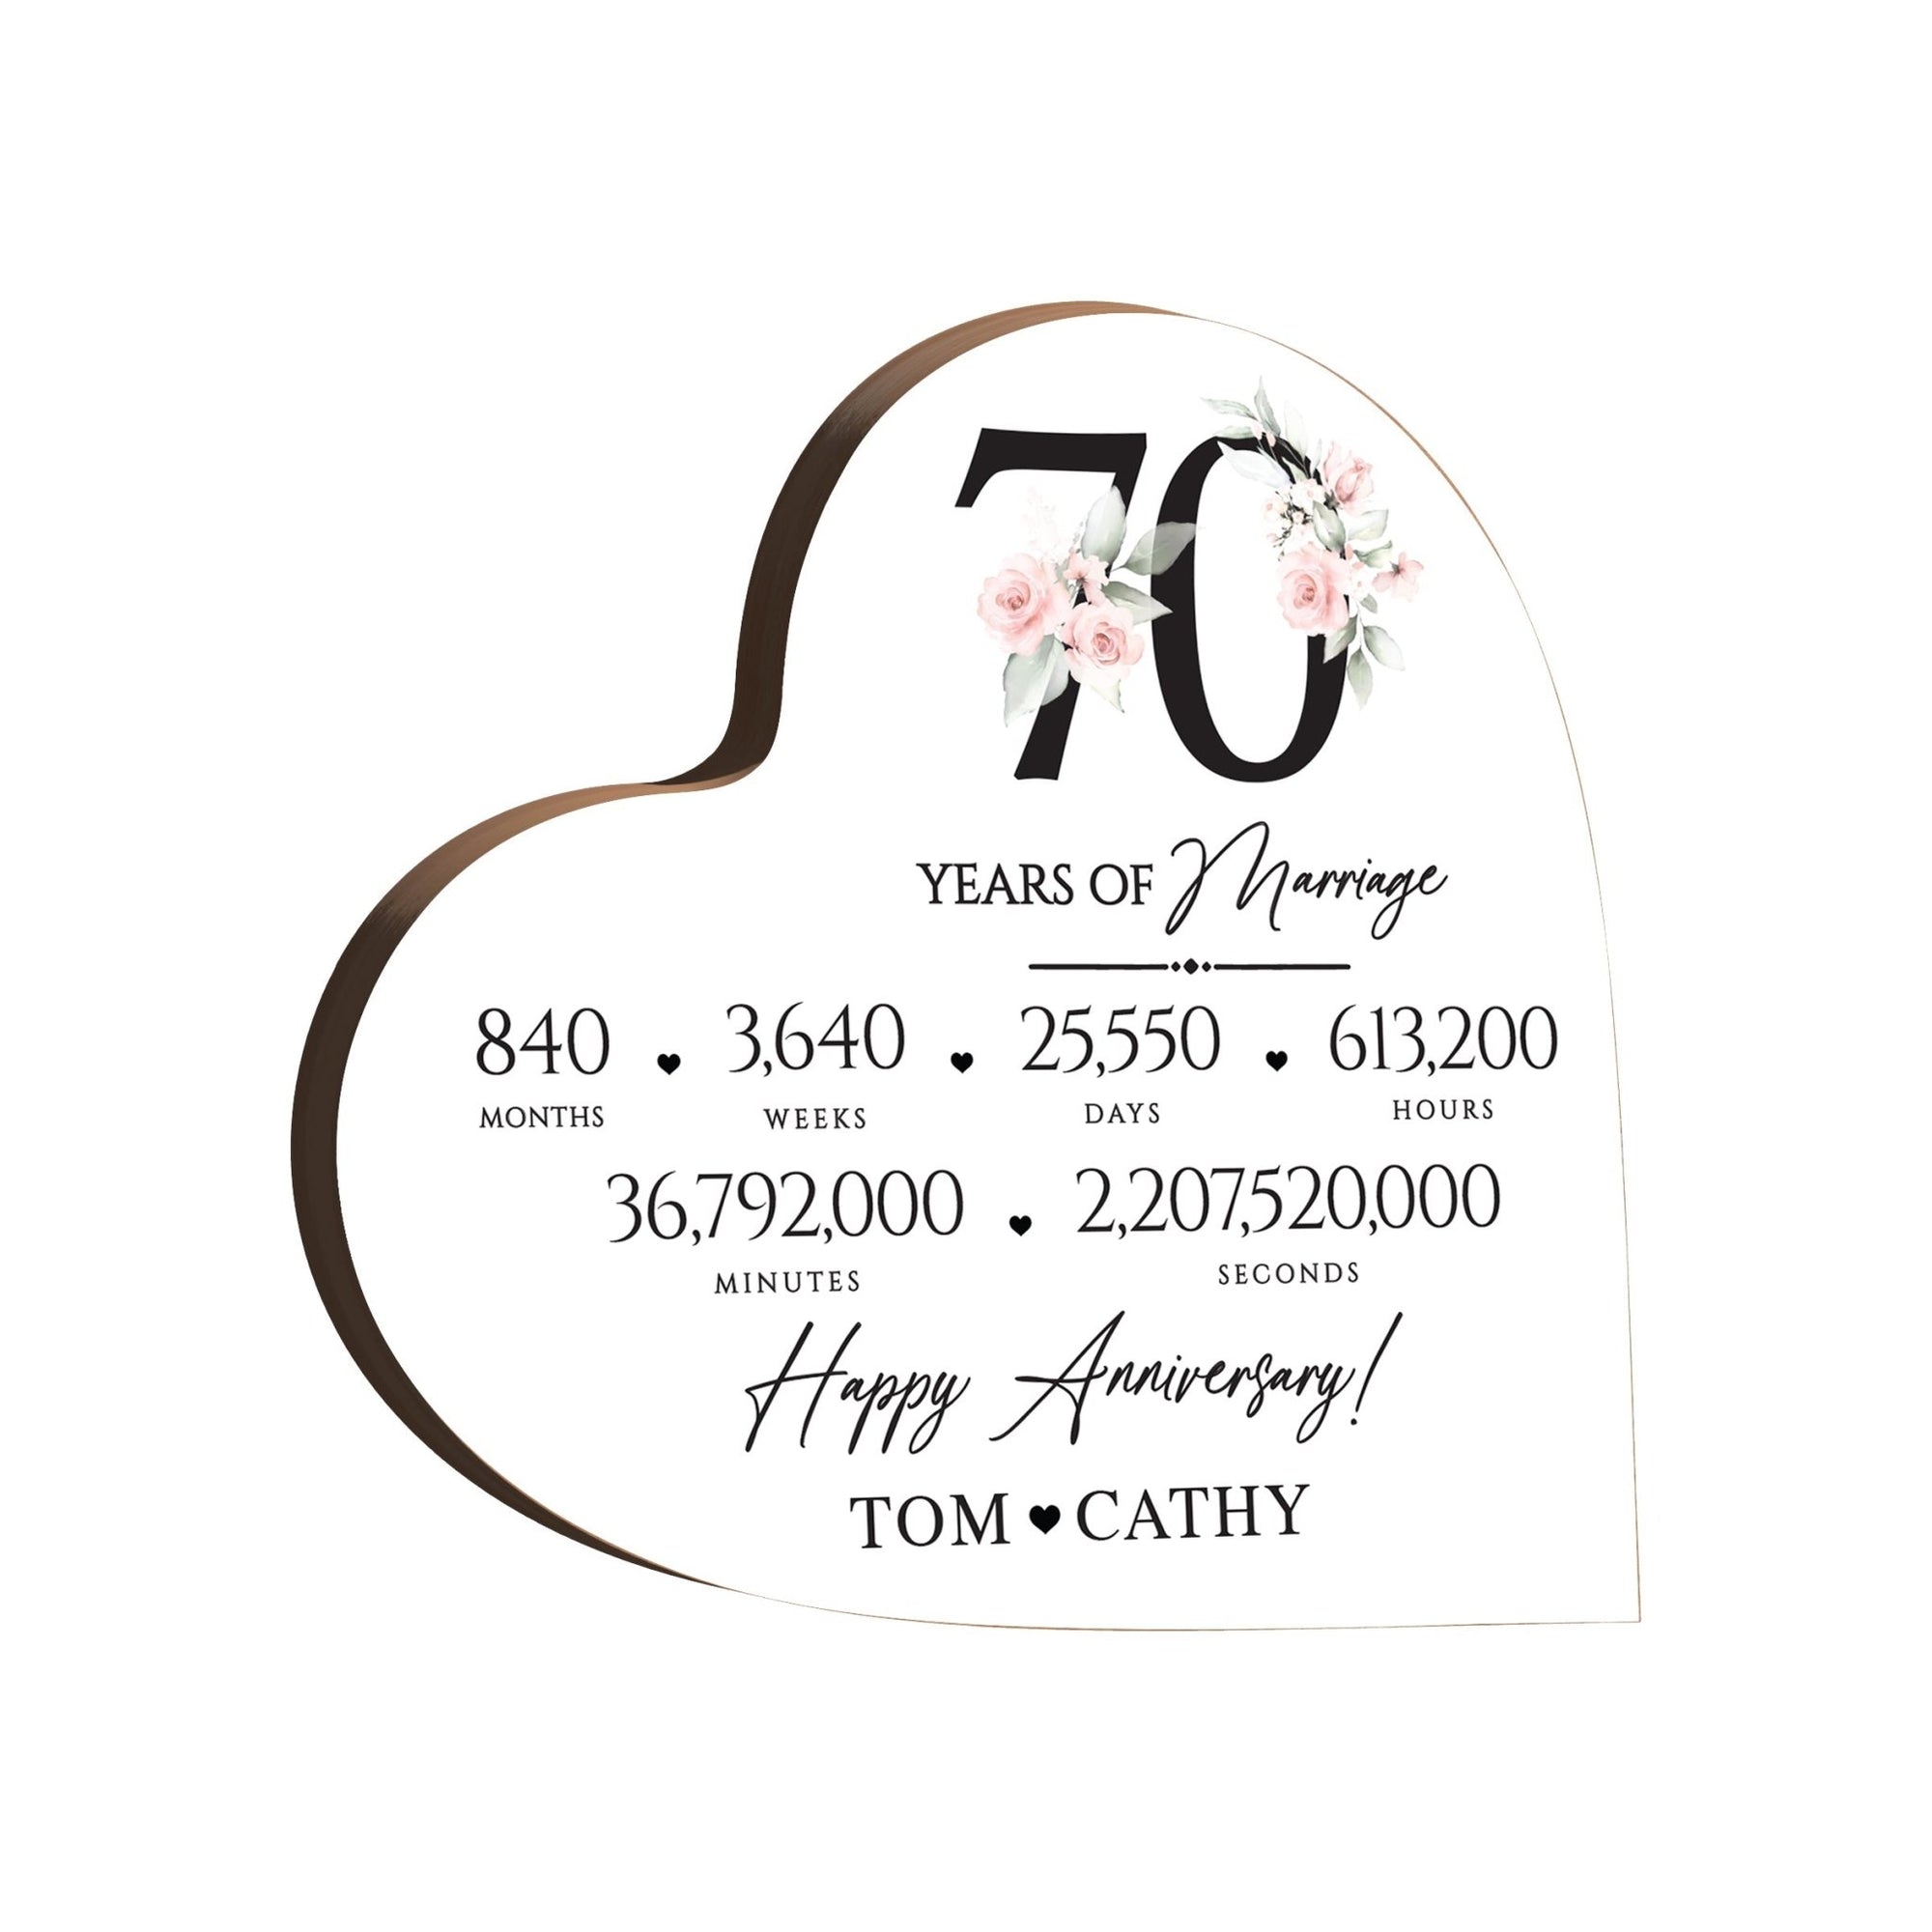 Personalized Wooden Anniversary Heart Shaped Signs - 70th Anniversary - LifeSong Milestones